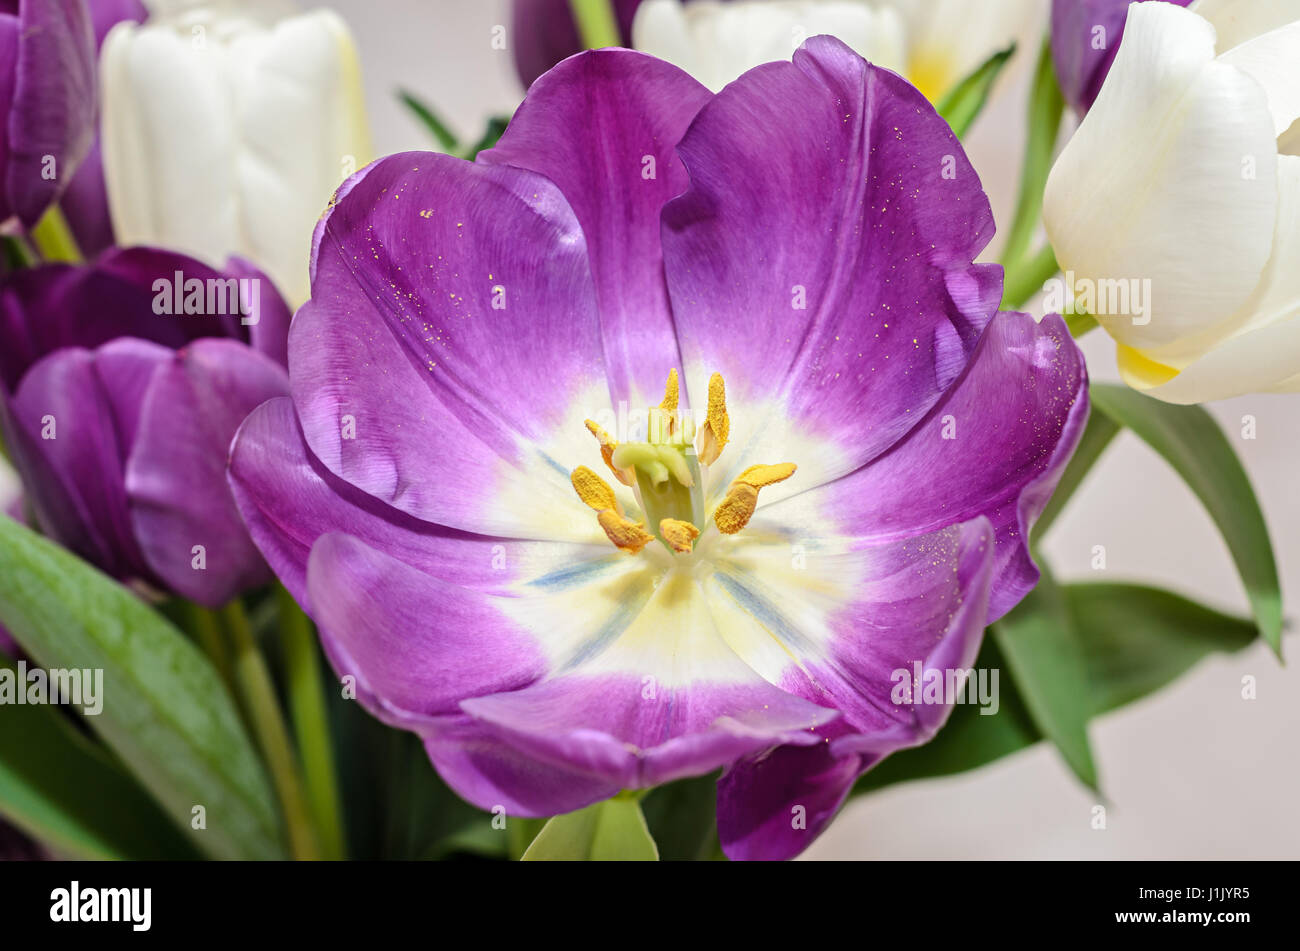 Violet tulip open flower close up with yellow pistils, isolated. Stock Photo